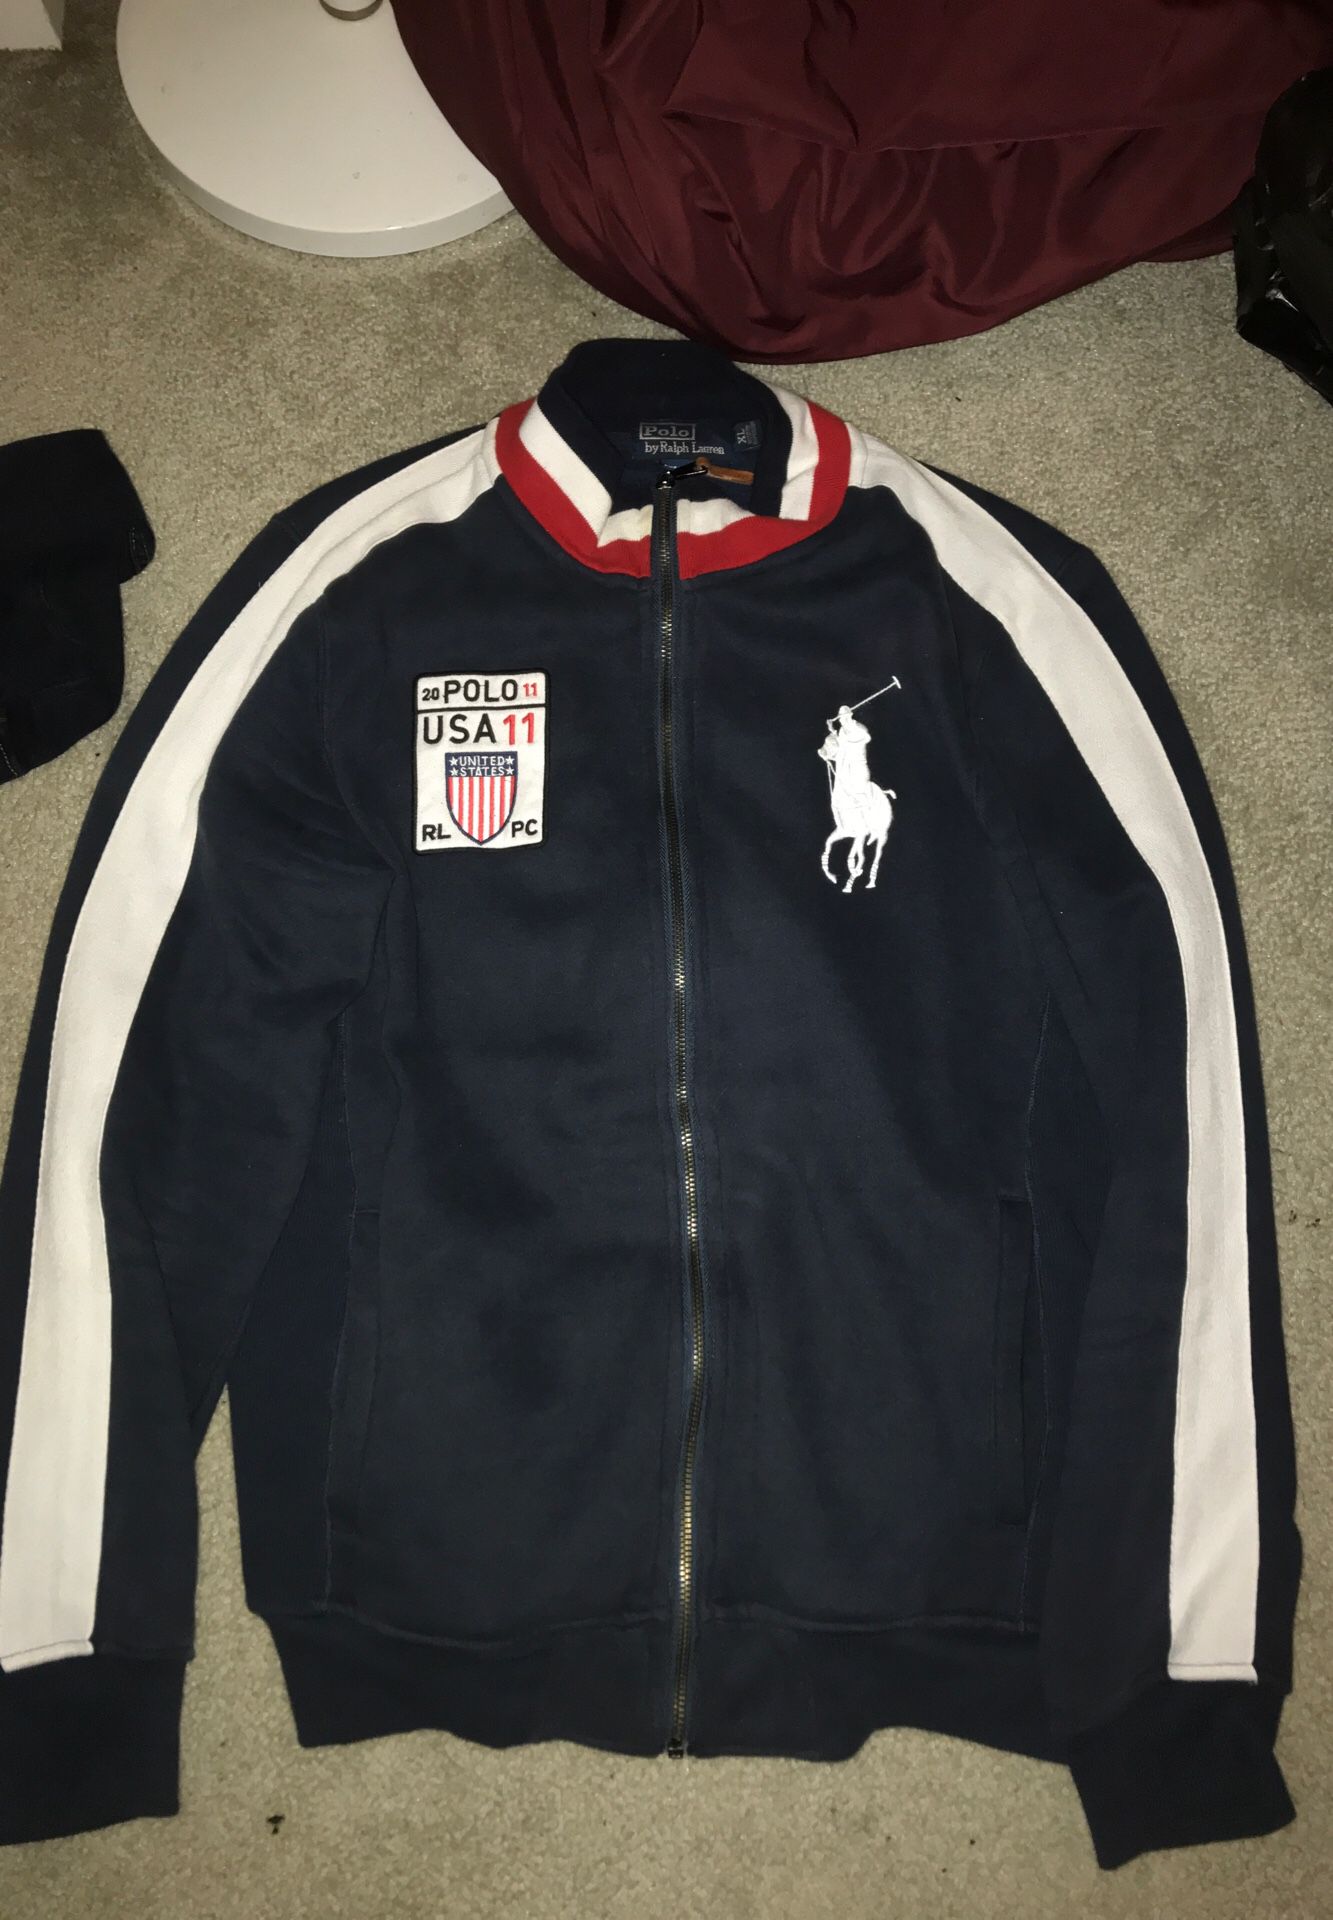 Vintage polo sweater